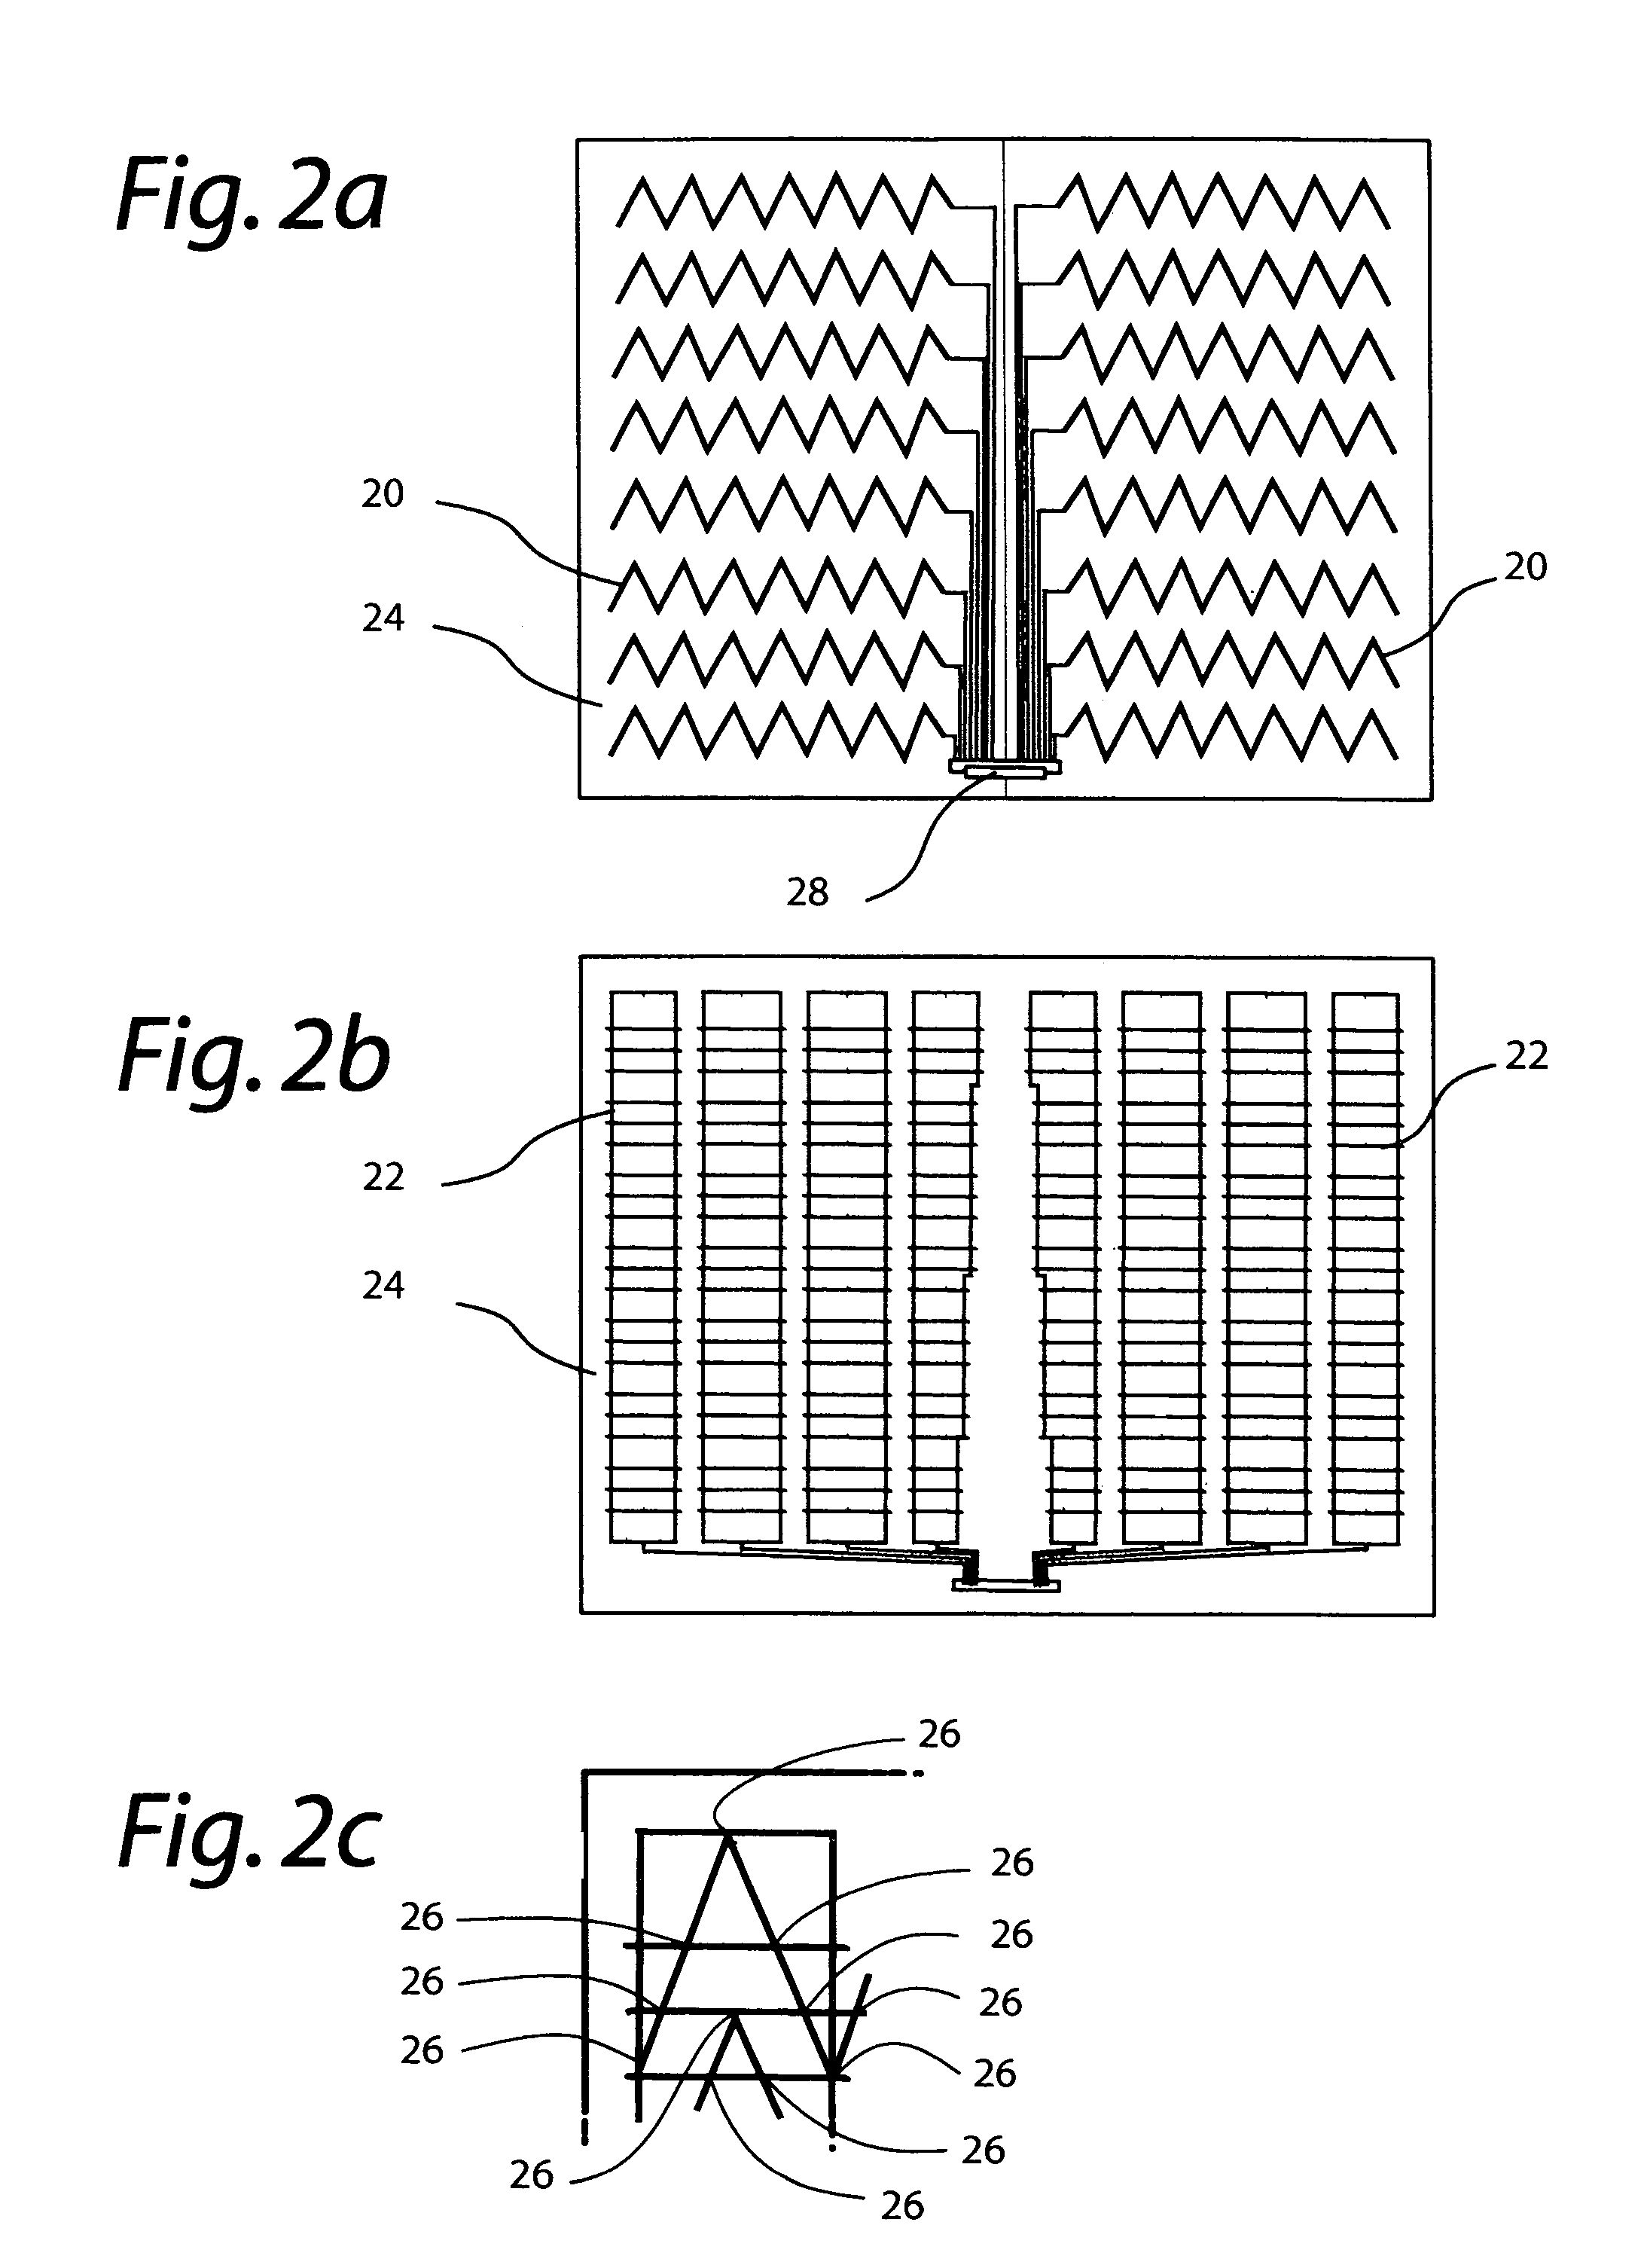 Apparatus, system and methods for collecting position information over a large surface using electrical field sensing devices